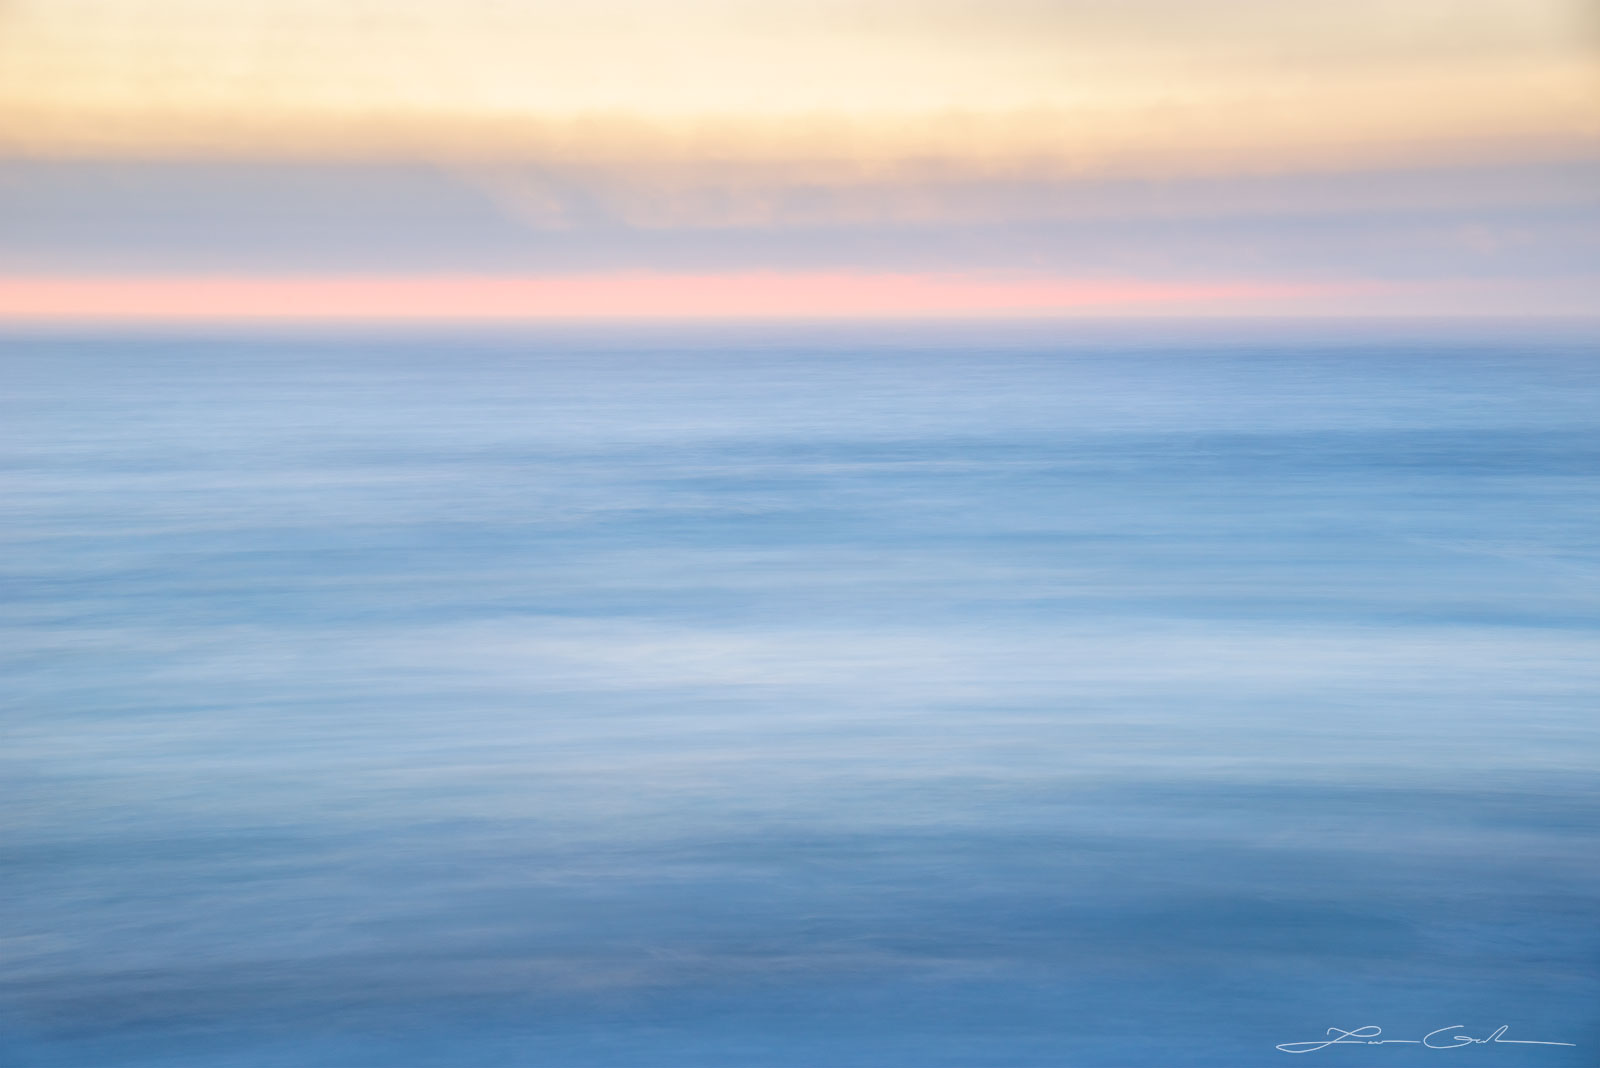 Blue sea abstract photo at sunrise with some pink on the horizon - Gintchin Fine Art